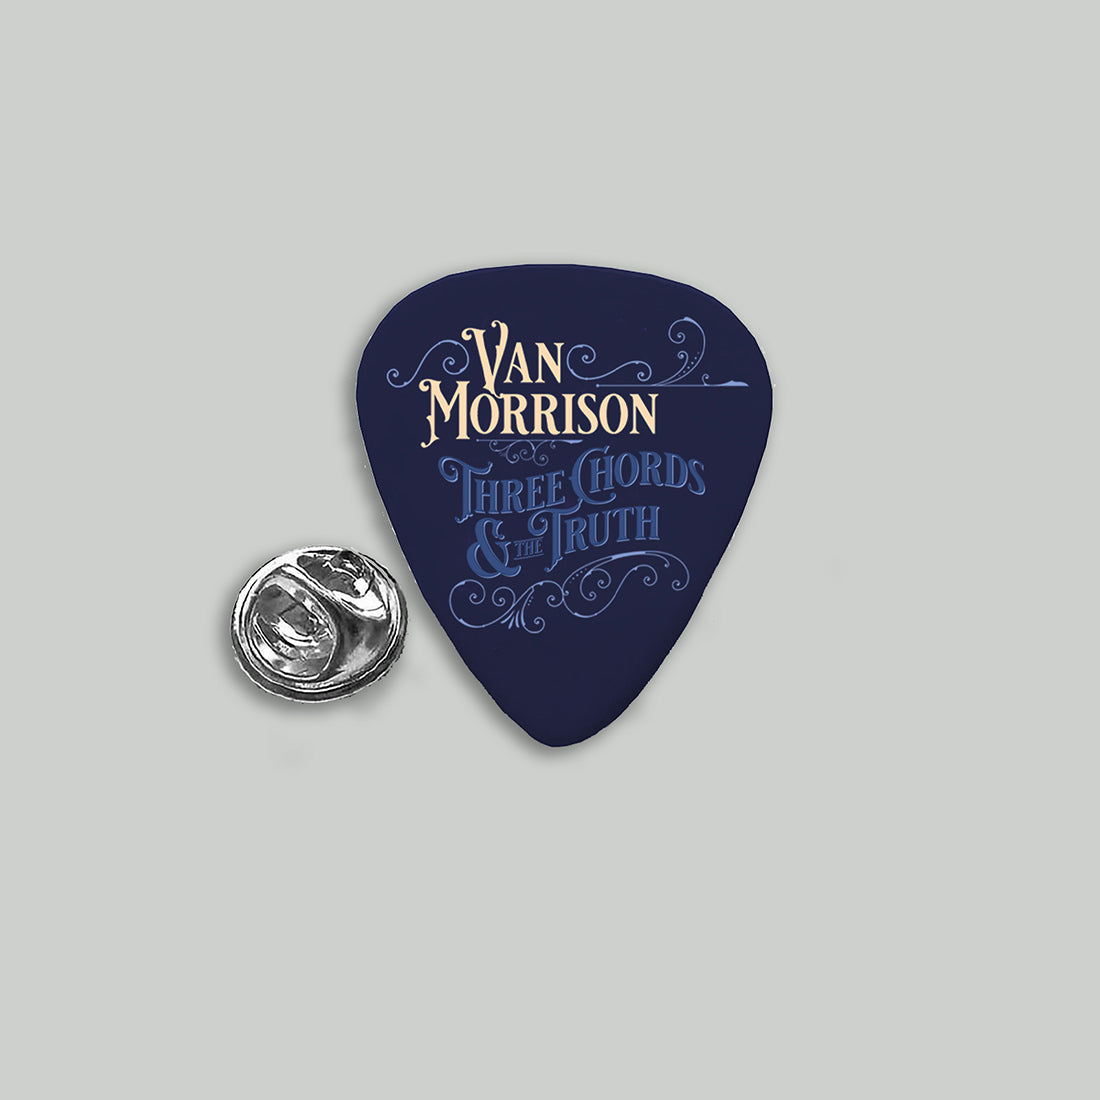 Van Morrison - Three Chords And The Truth Badges